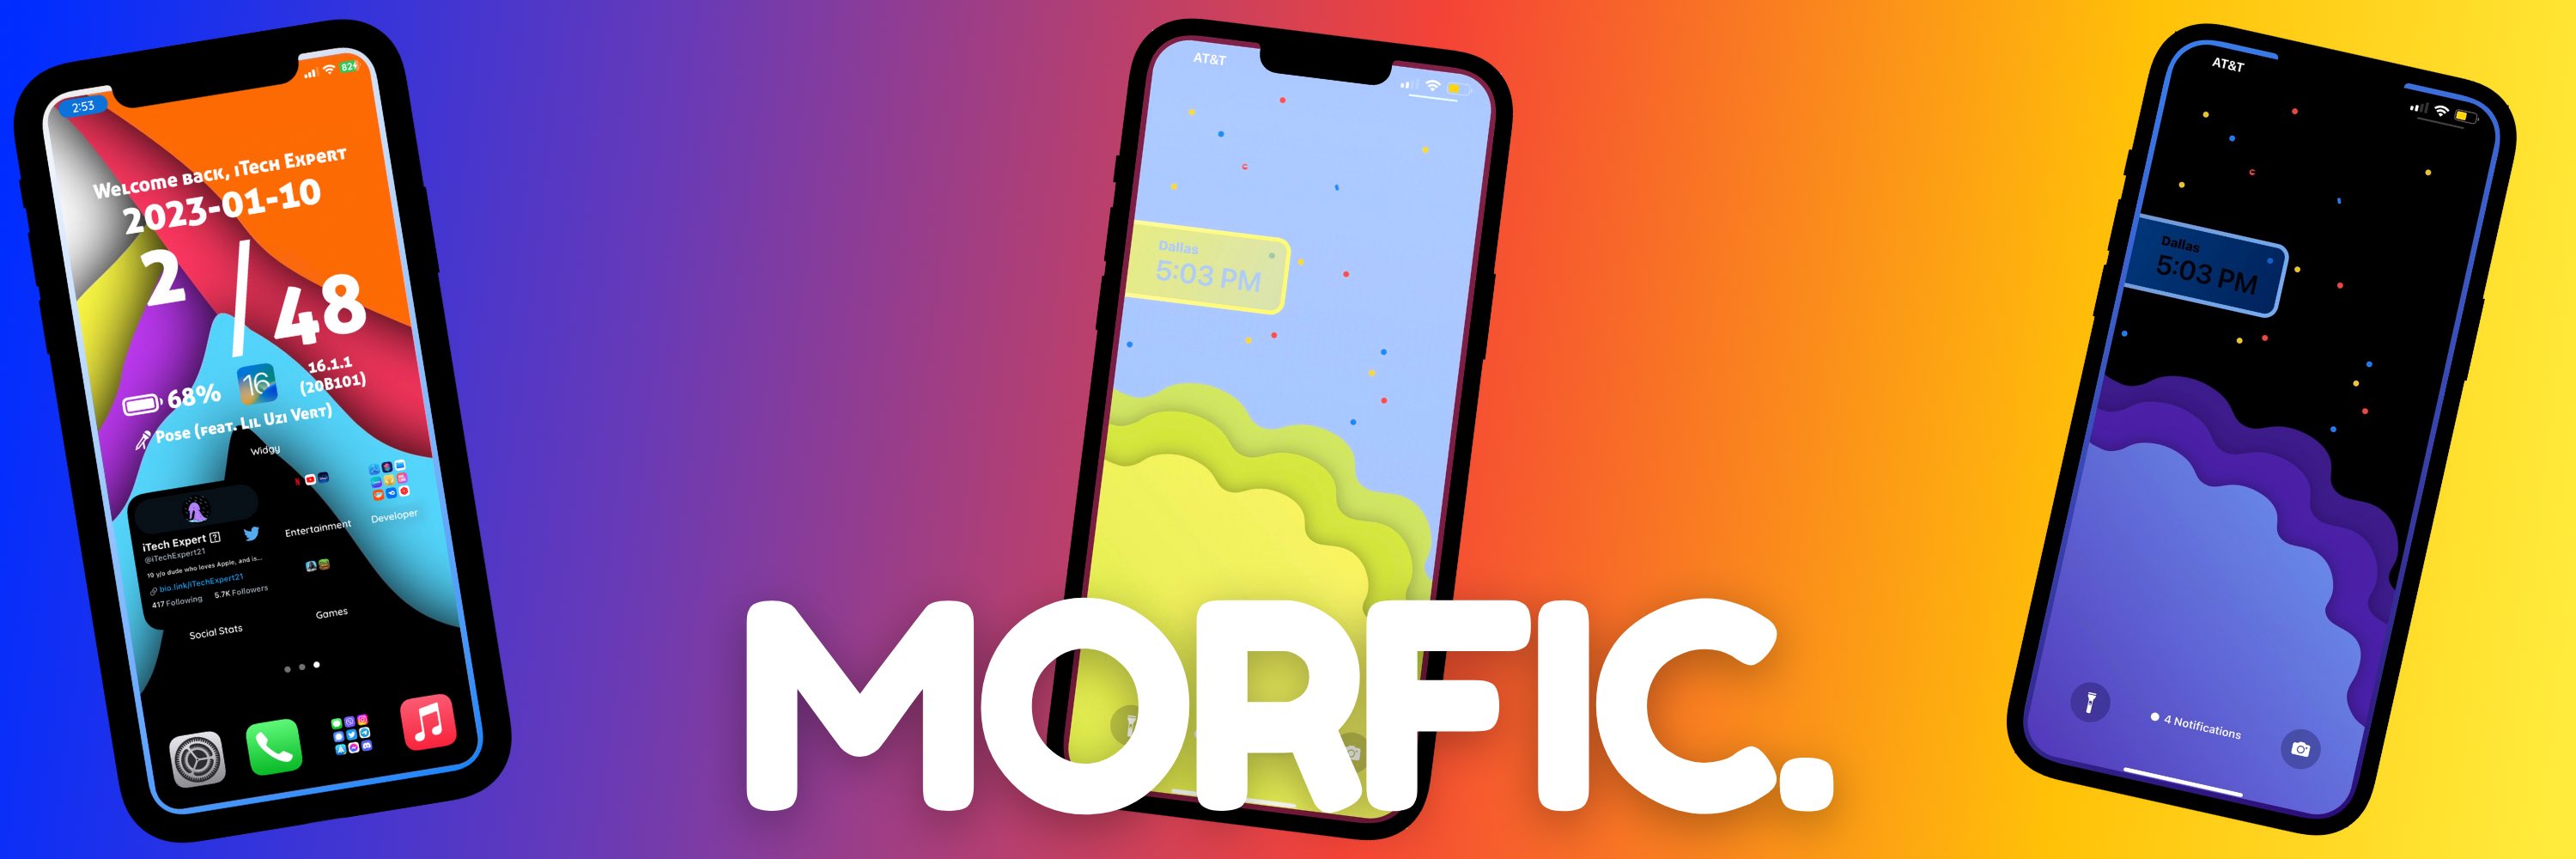 Morfic is a new wallpaper customization app for iPhone.